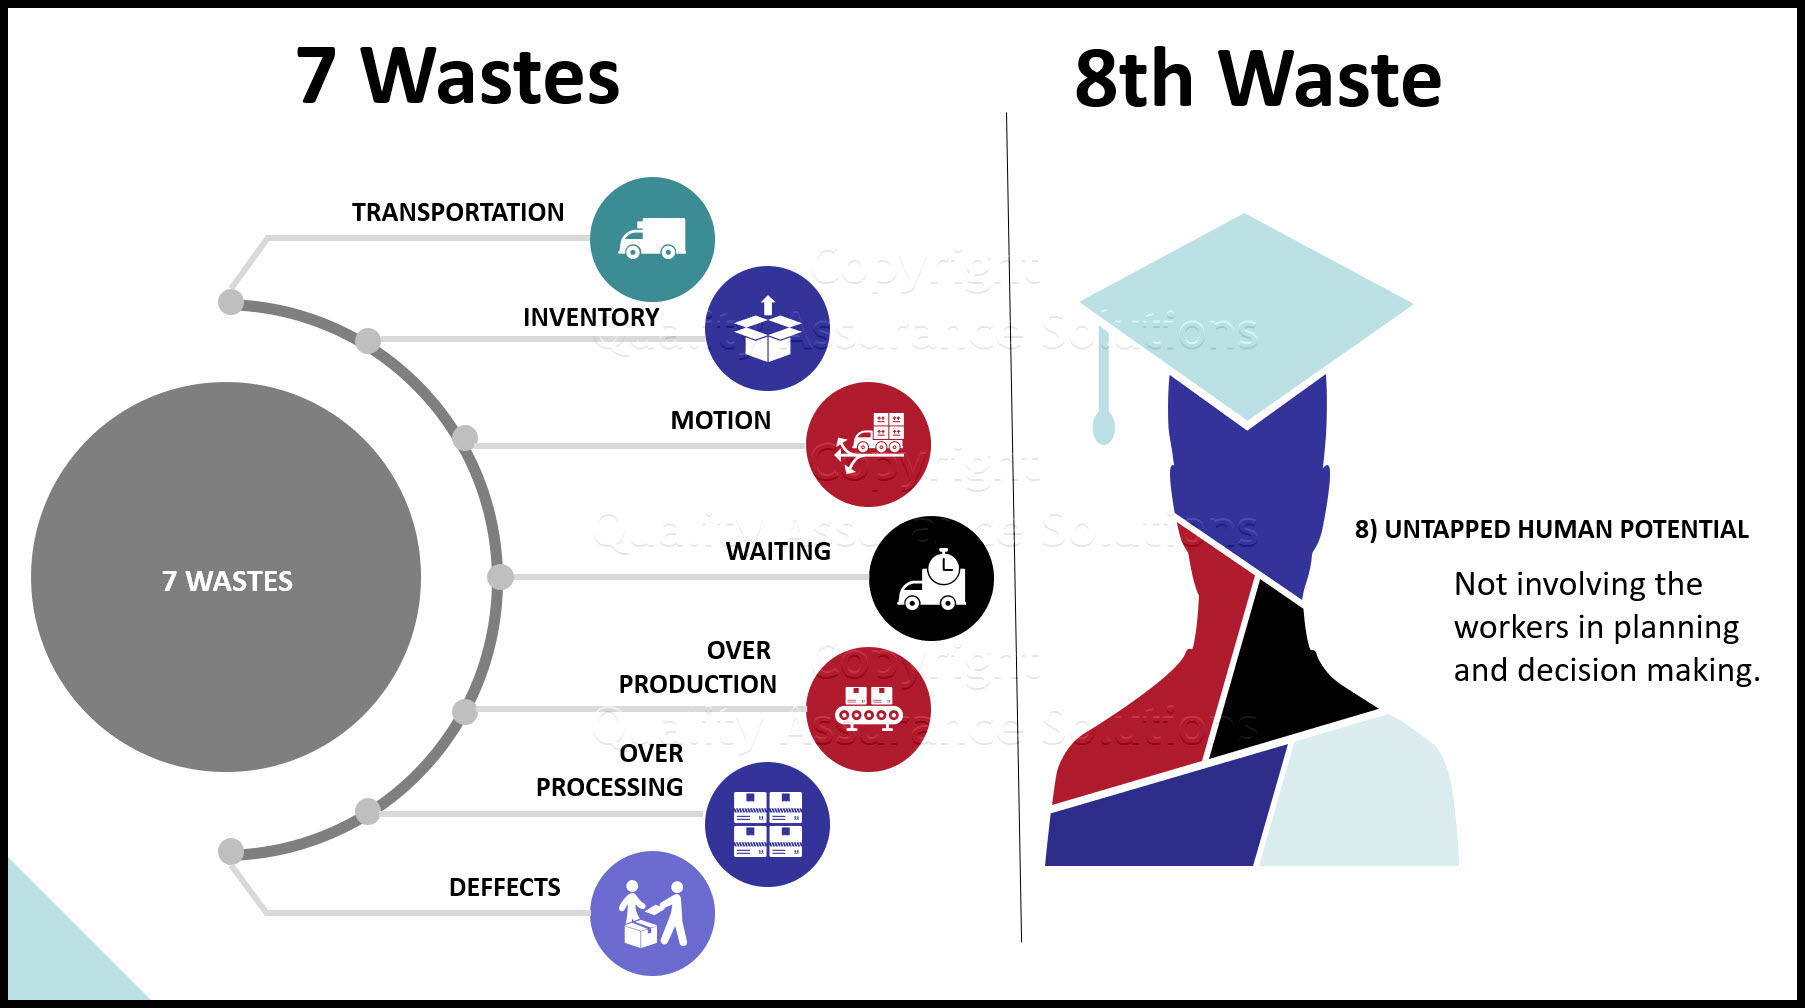 Learn how to conduct the 7 wastes walk to eliminate the 7 or 8 wastes during lean implementation.